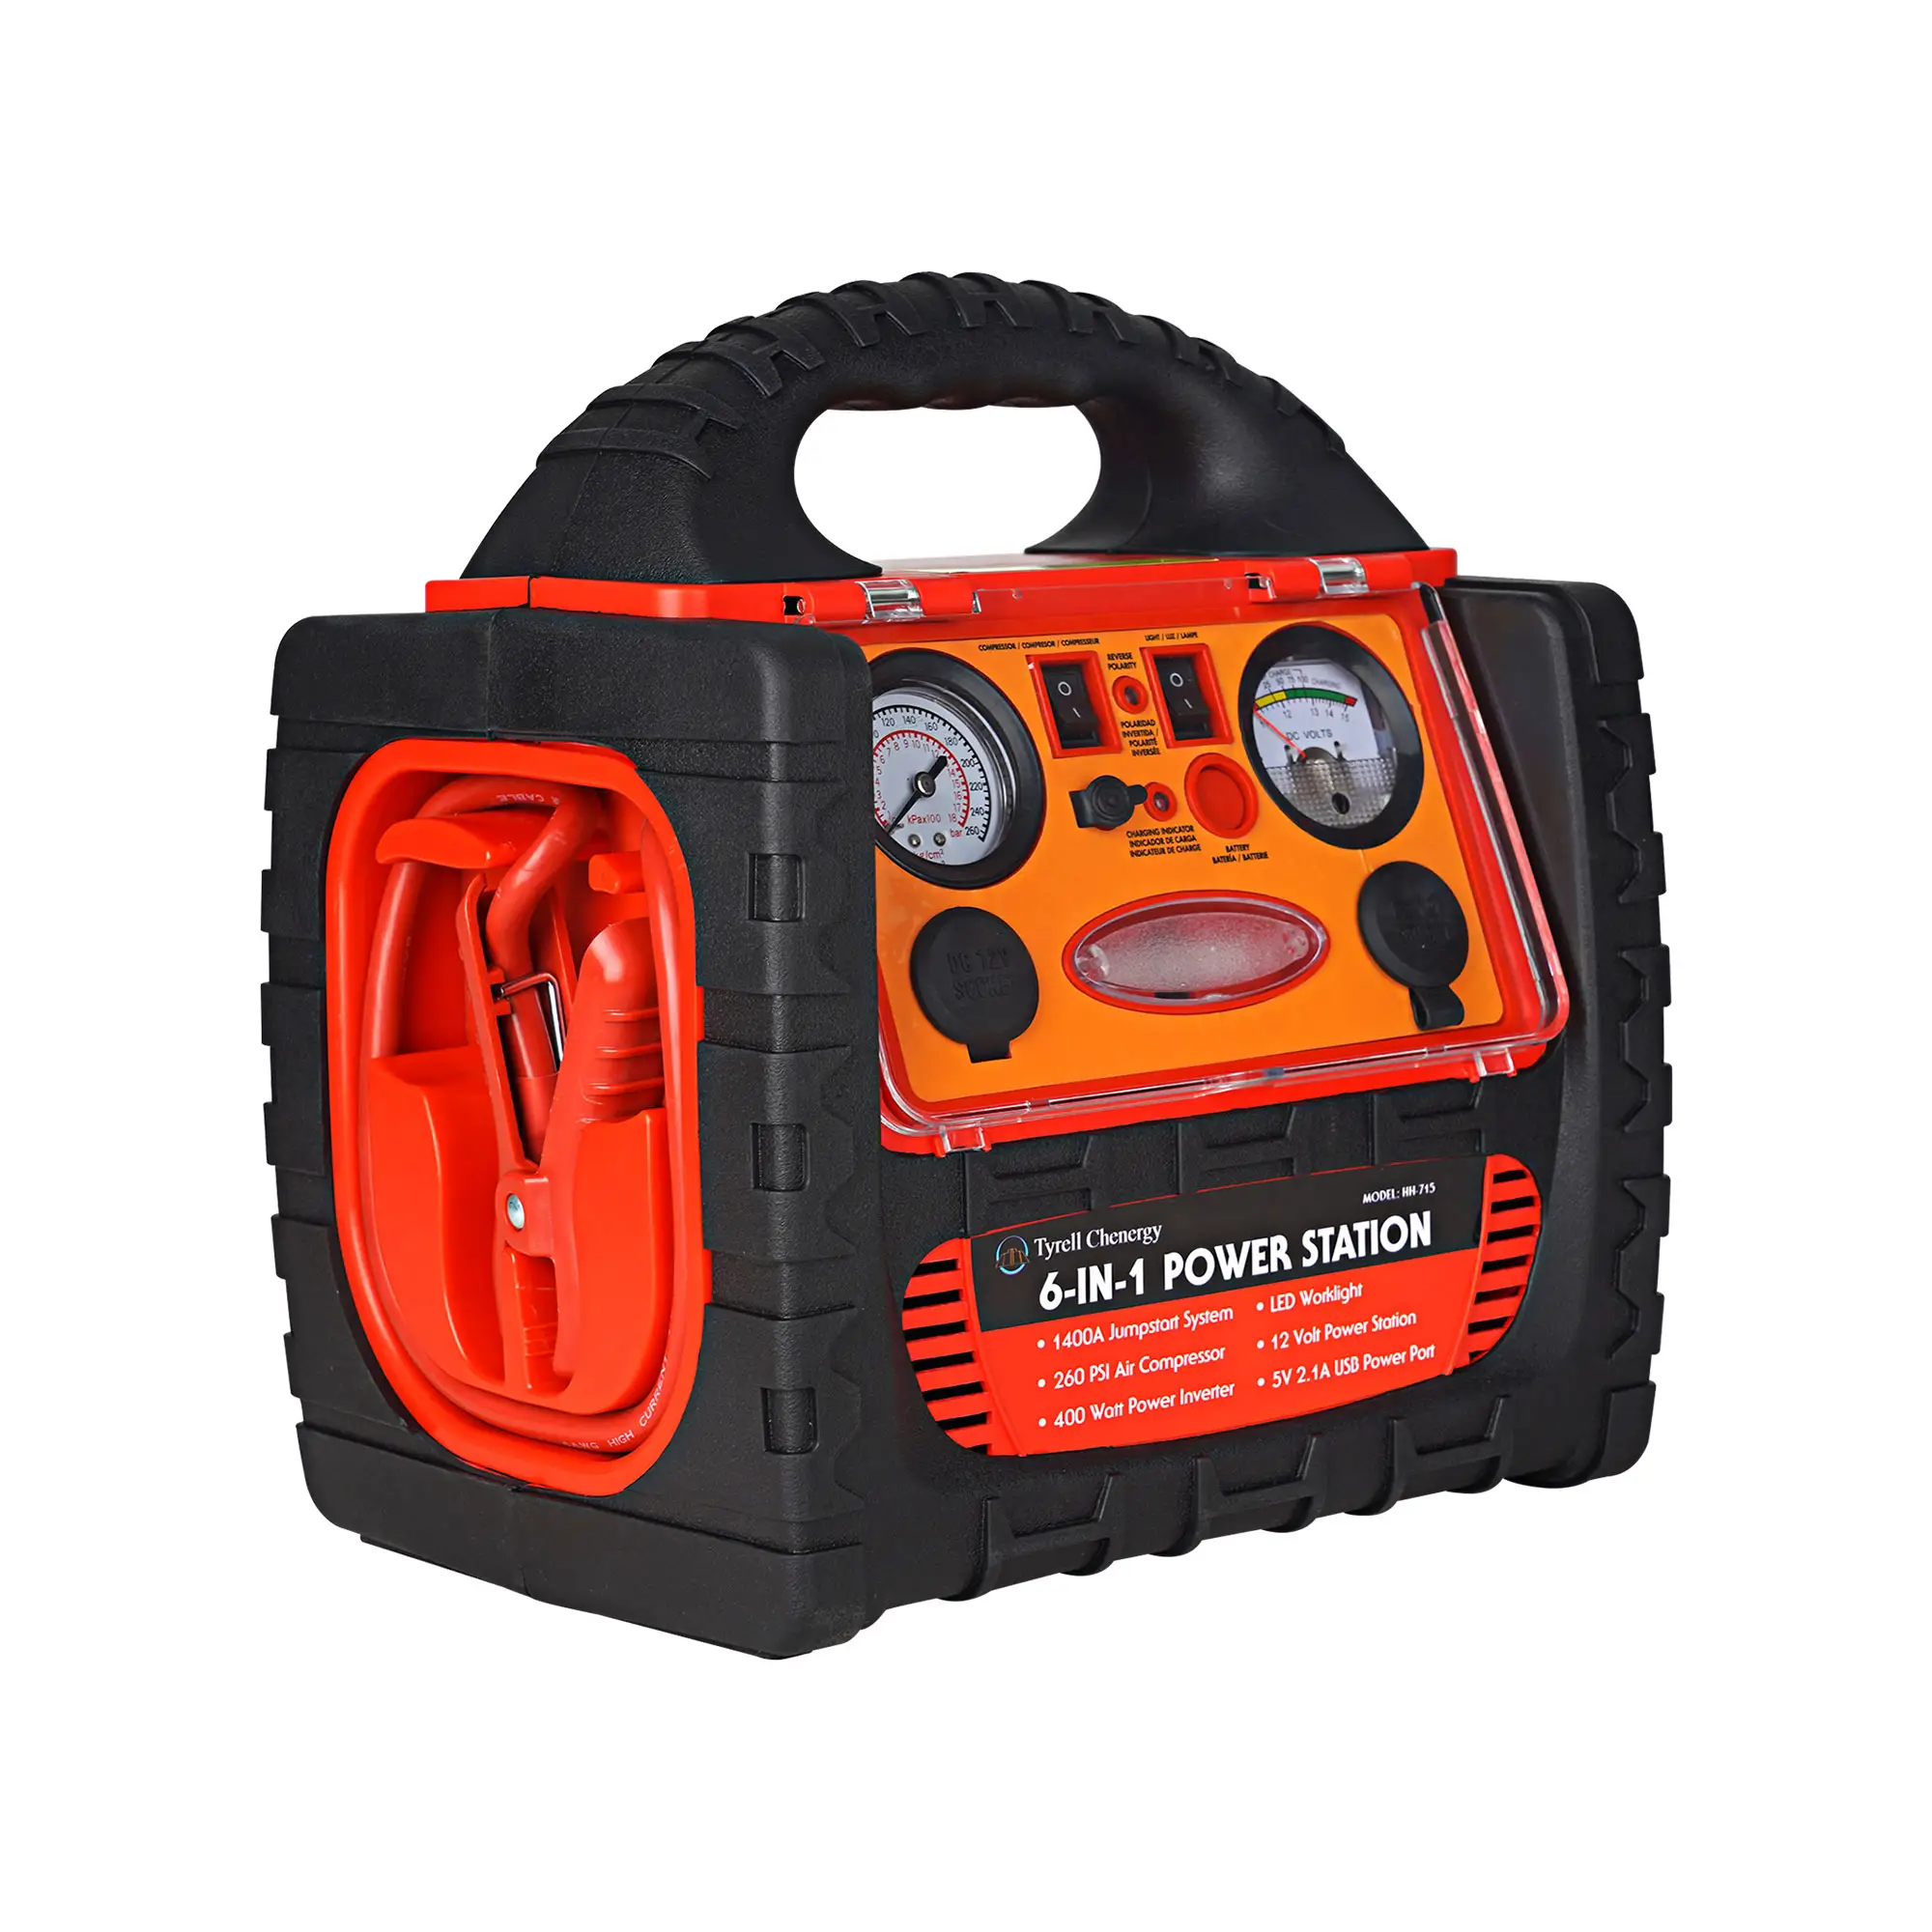 High power power station Portable 12v multi-function car jump starter with air compressor